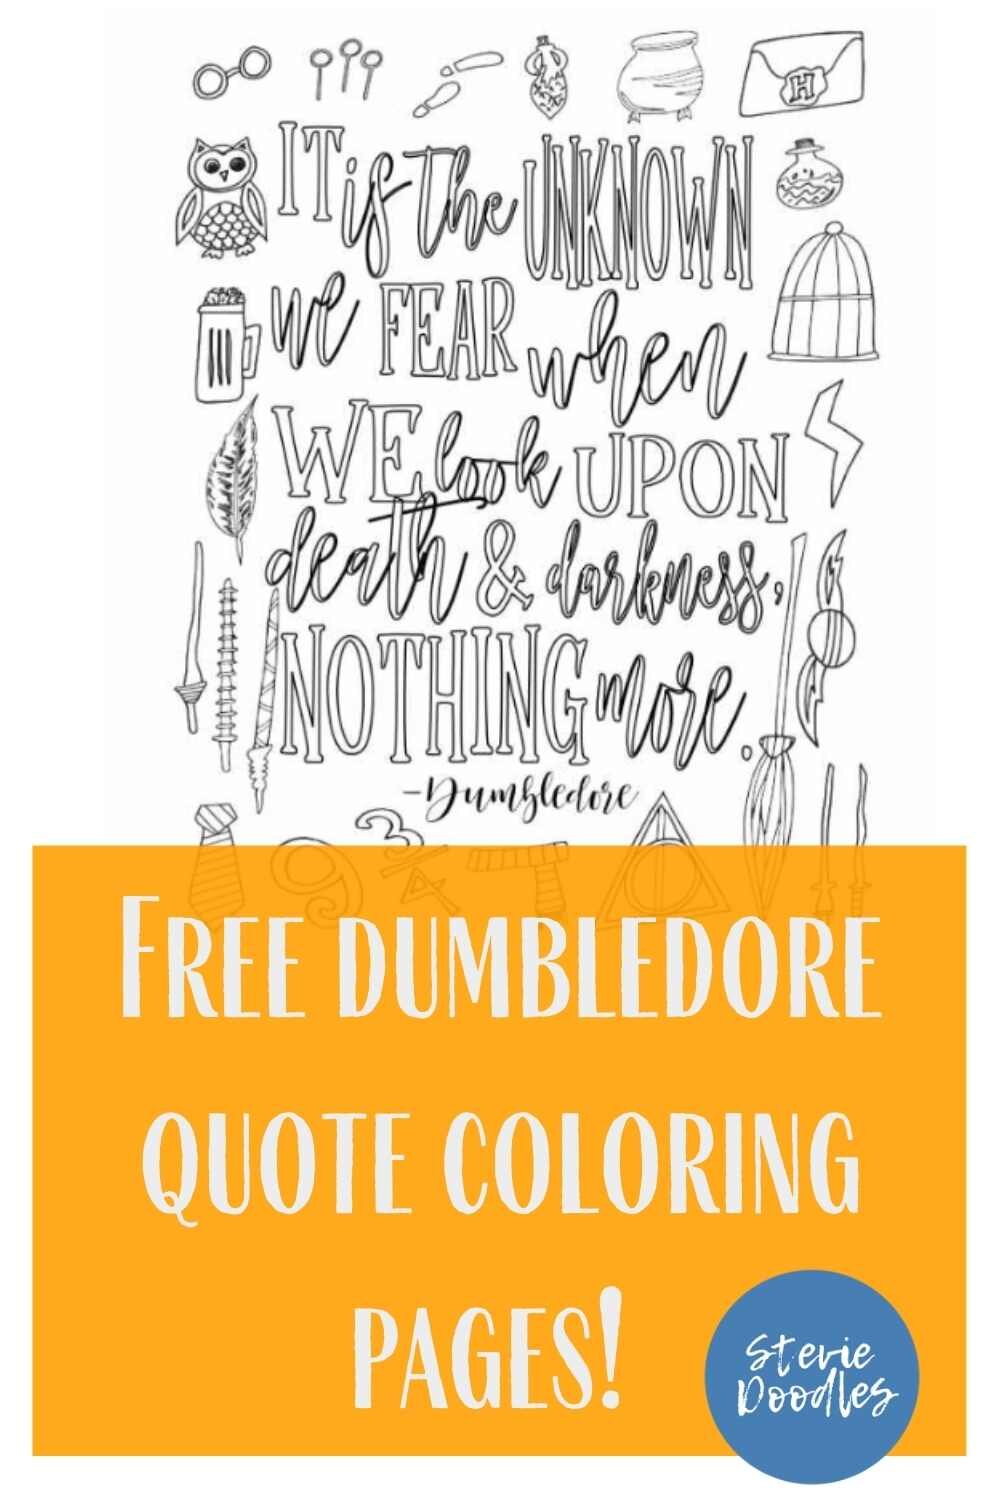 Free Dumbledore coloring page! find more Harry Potter - inspired pages at Stevie Doodles + over 1000 other free pages to print and color